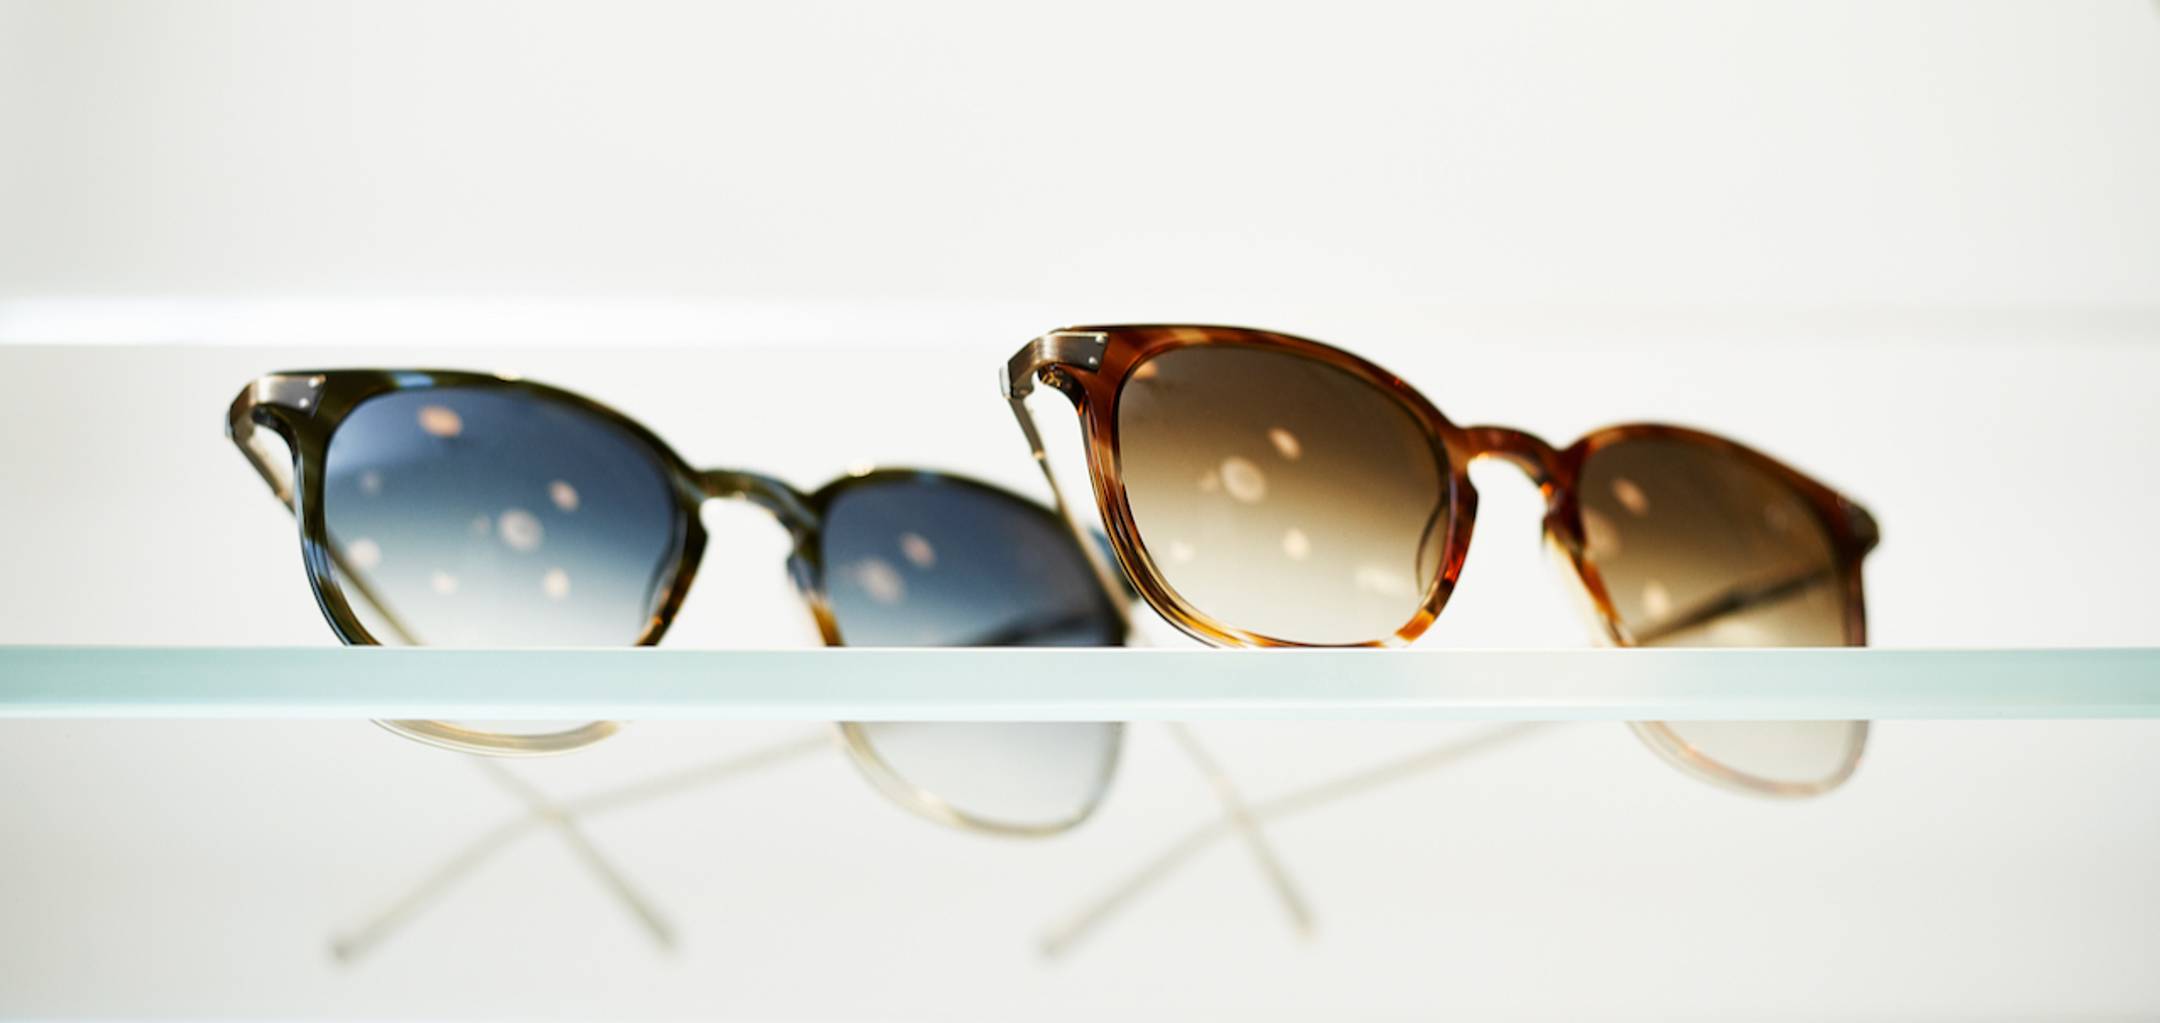 Close up shot of two pairs of sunglasses